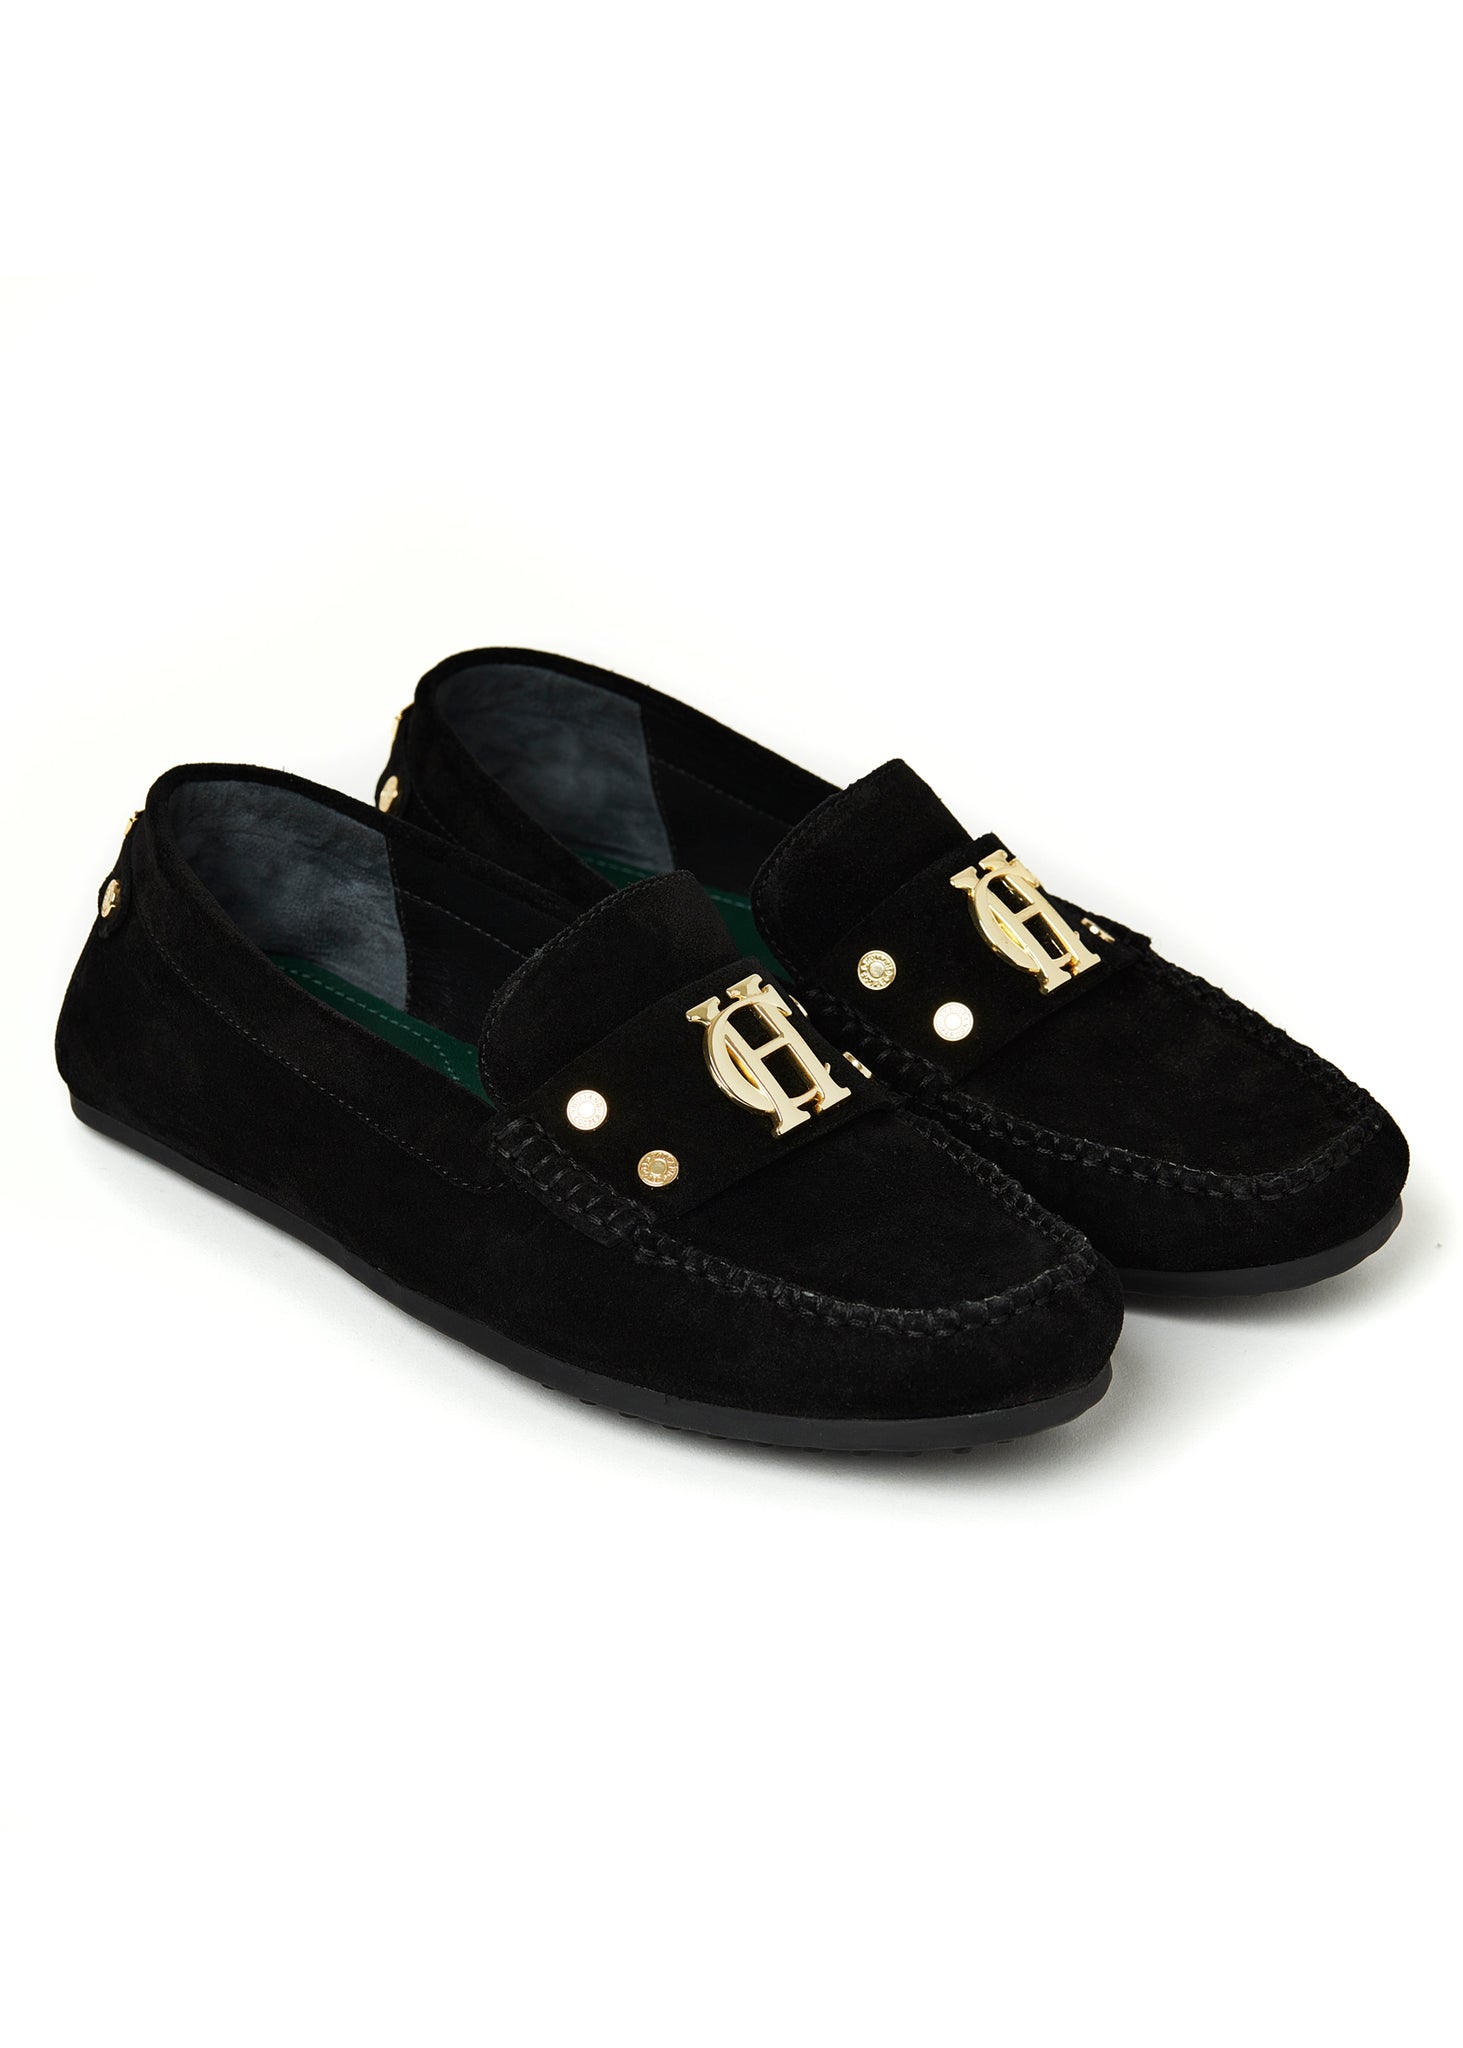 classic black suede loafers with a leather sole and top stitching details and gold hardware and dark green inner sole